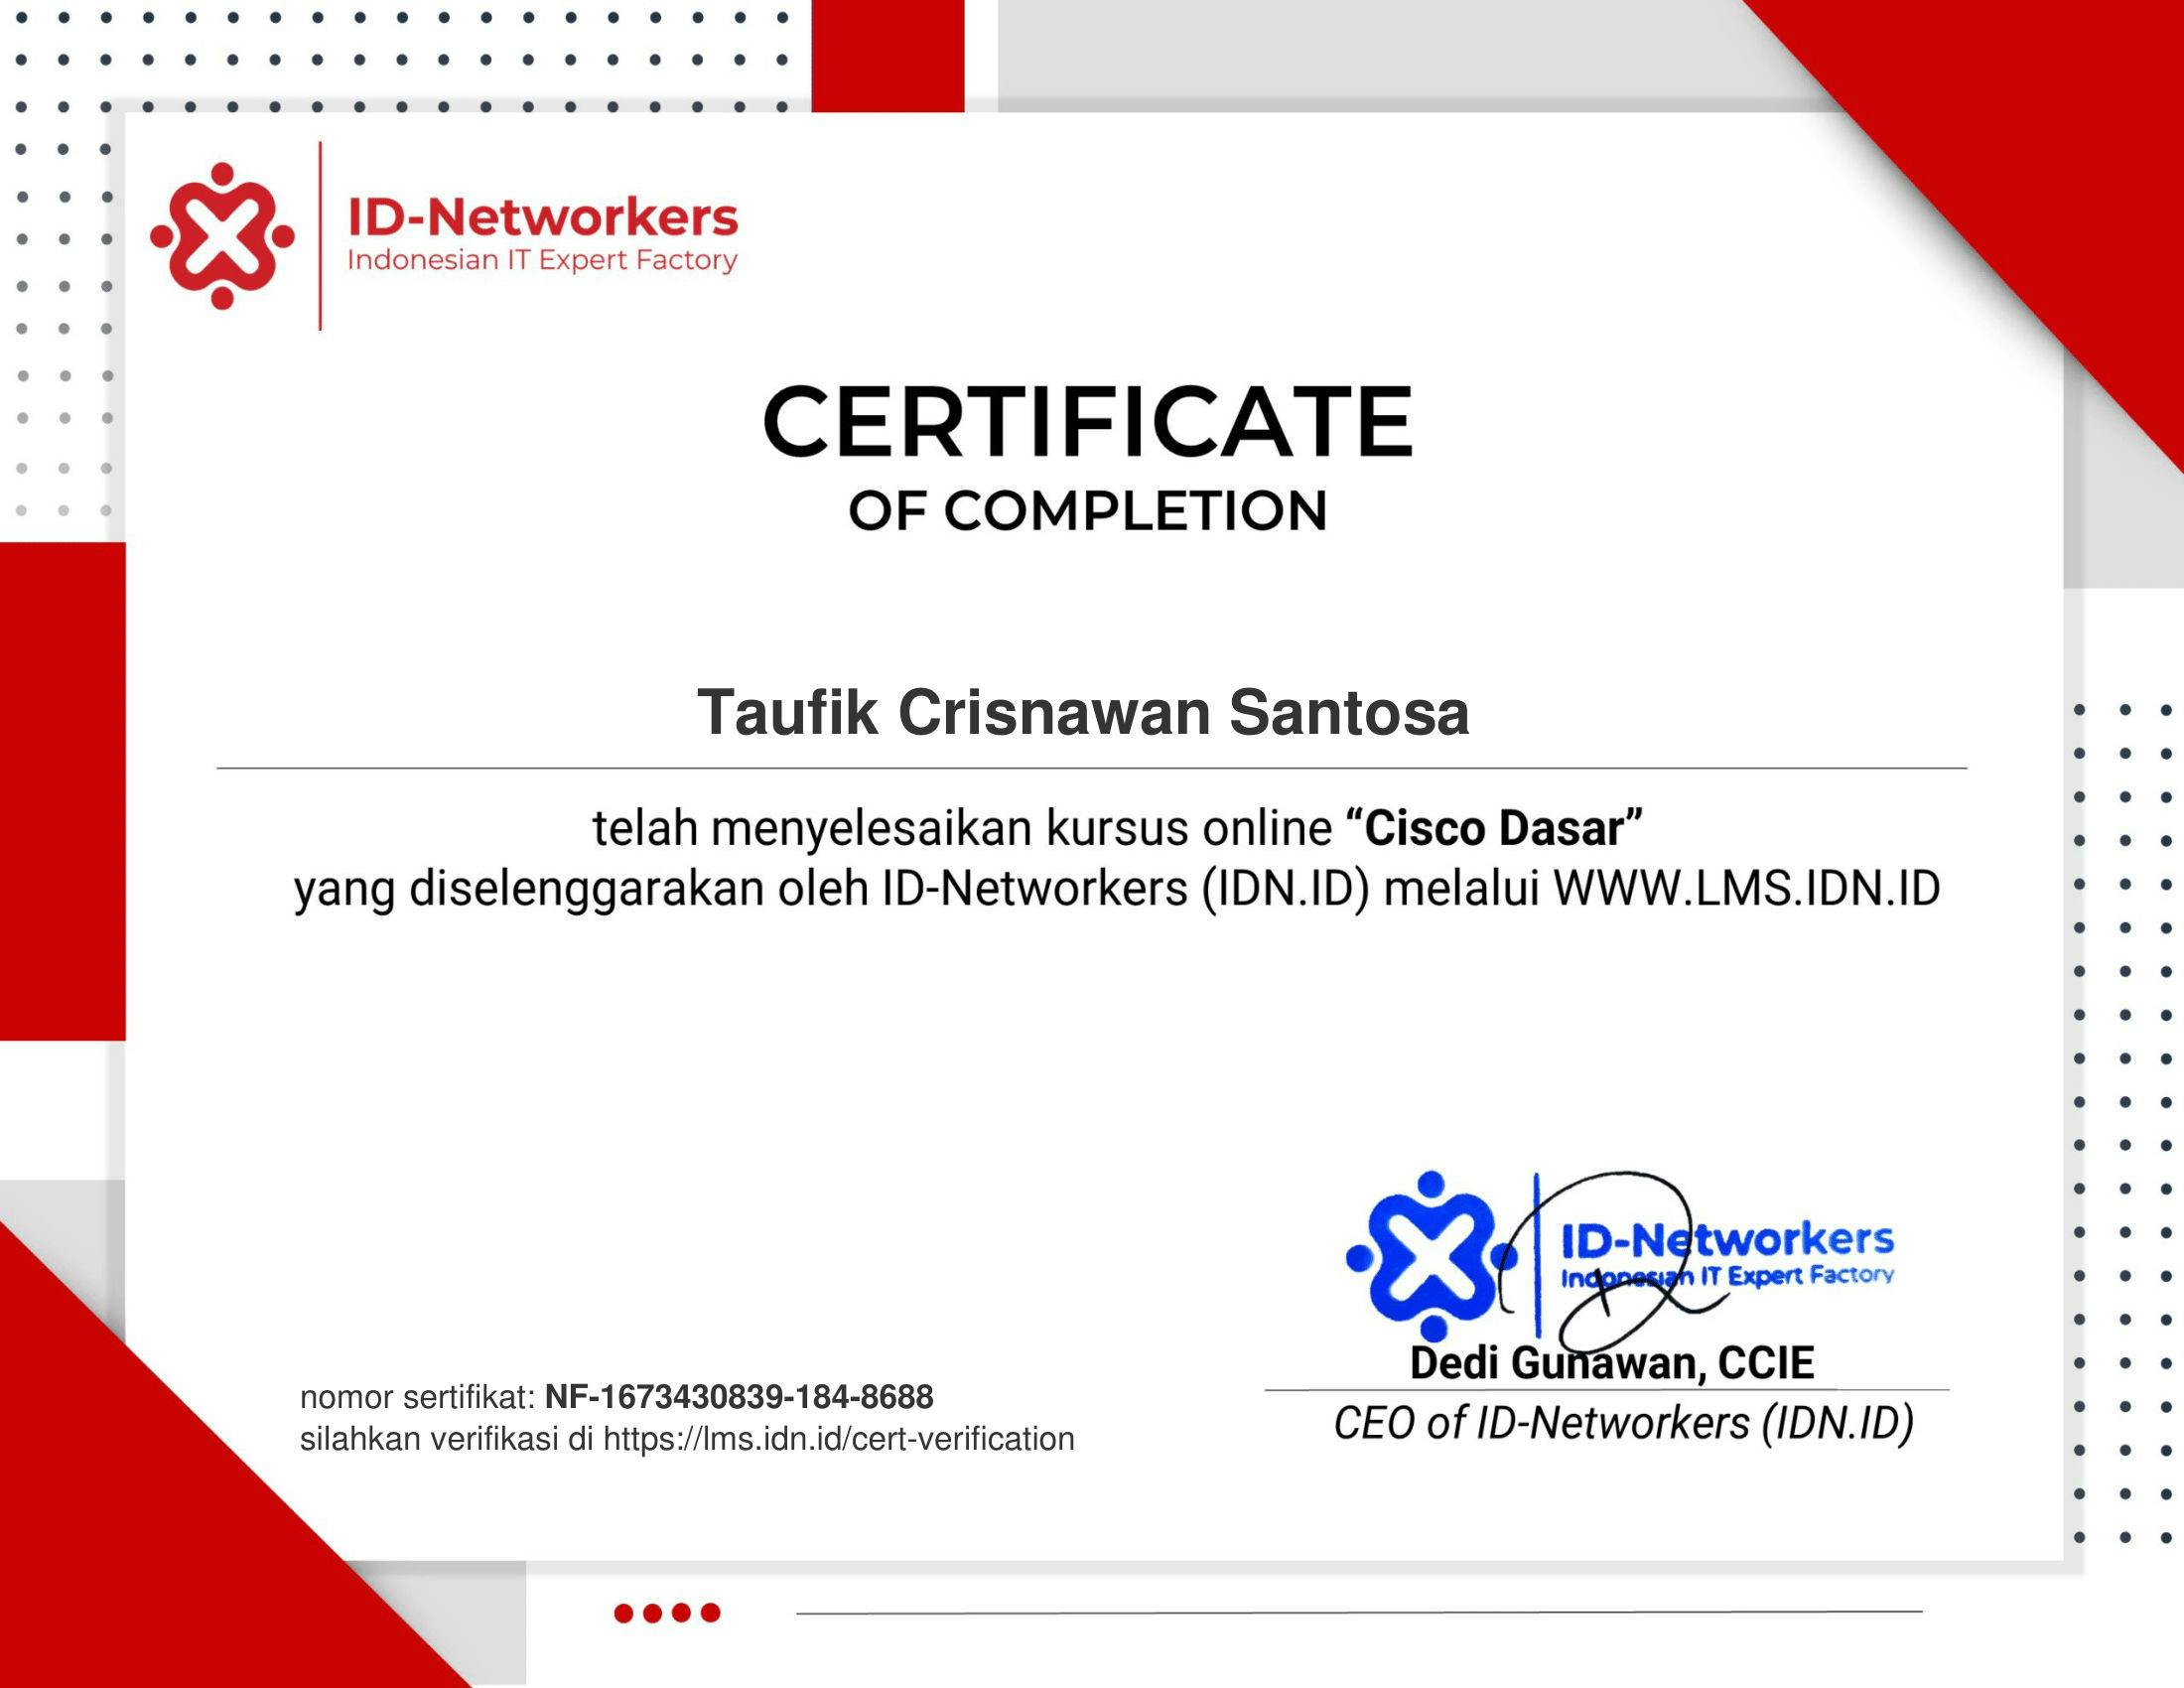 Cisco Dasar - ID Networkers certificate